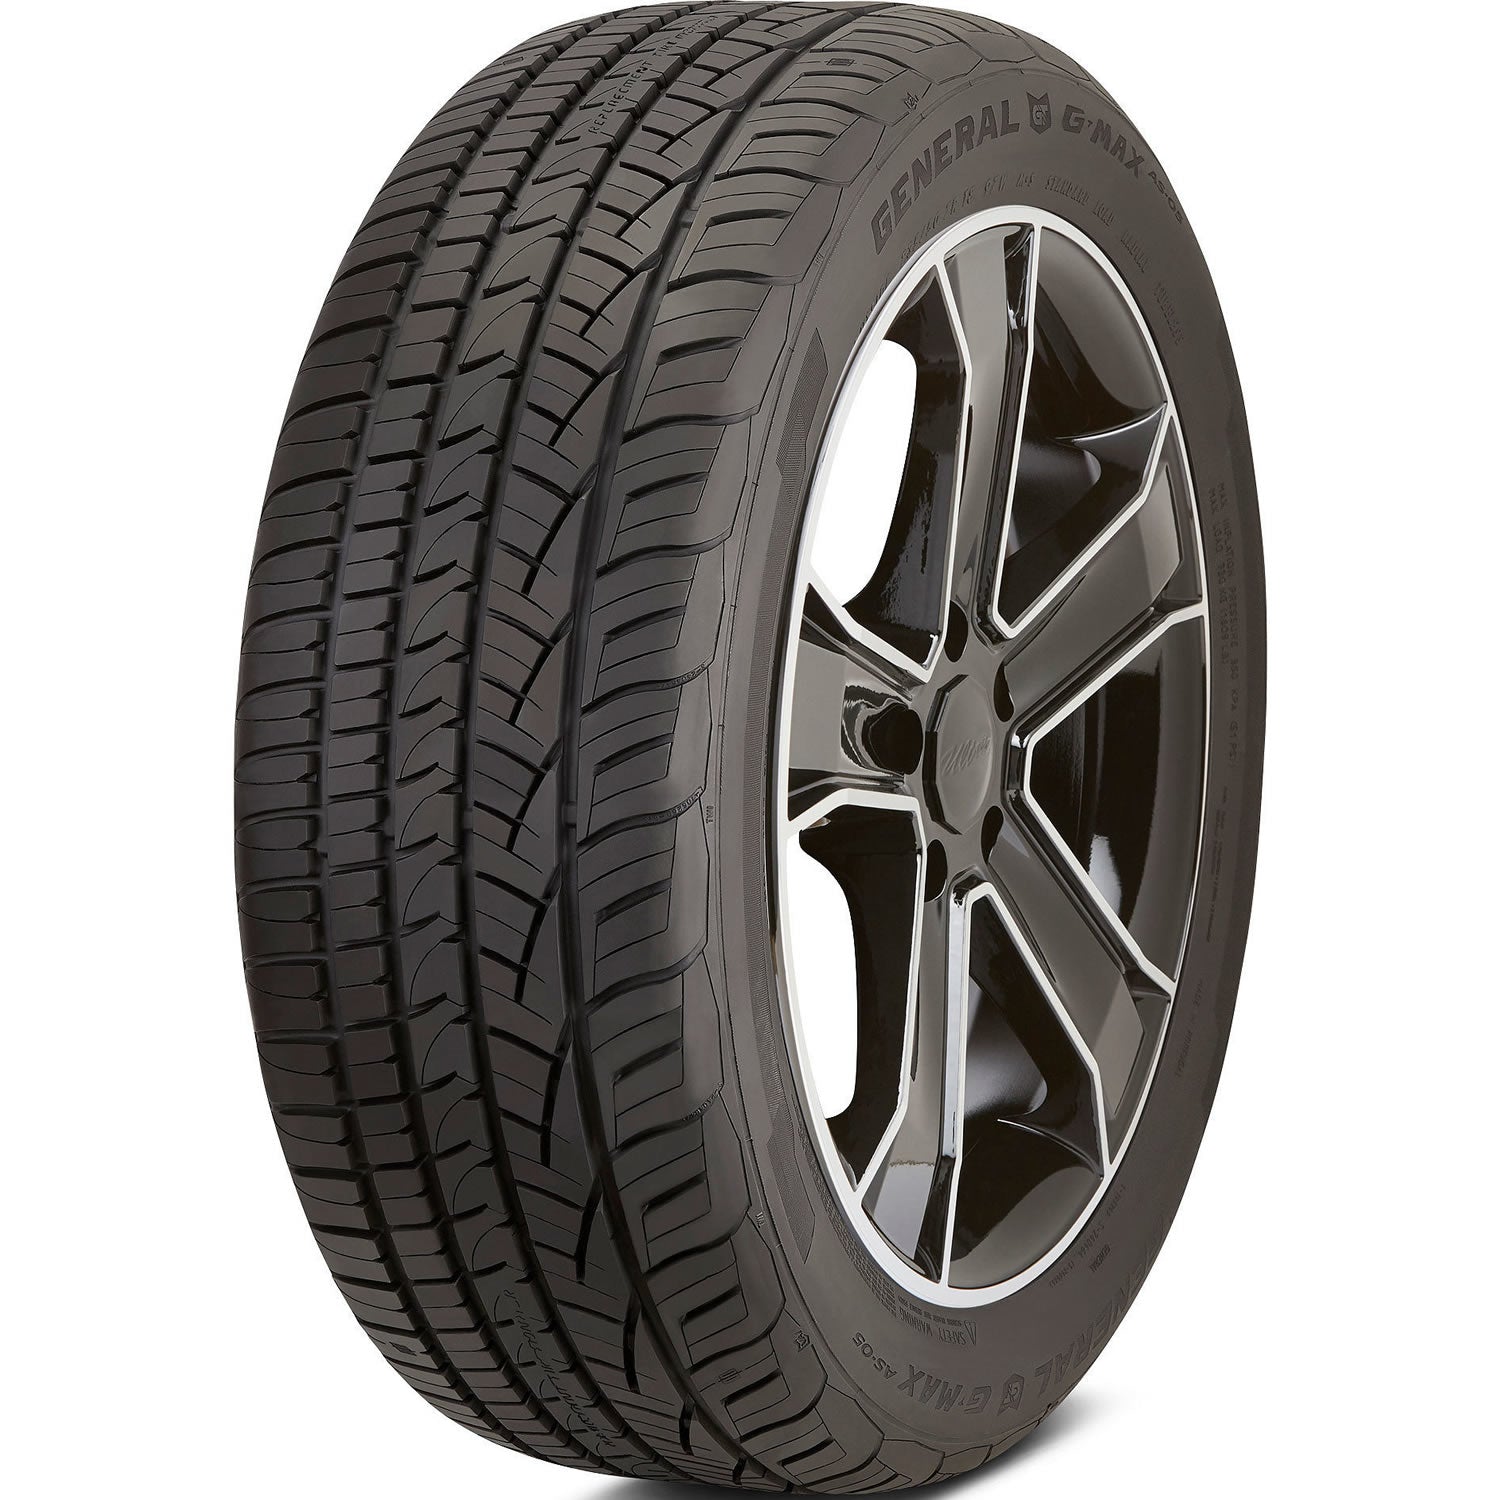 GENERAL G-MAX AS-05 225/40ZR18 (25.1X8.9R 18) Tires